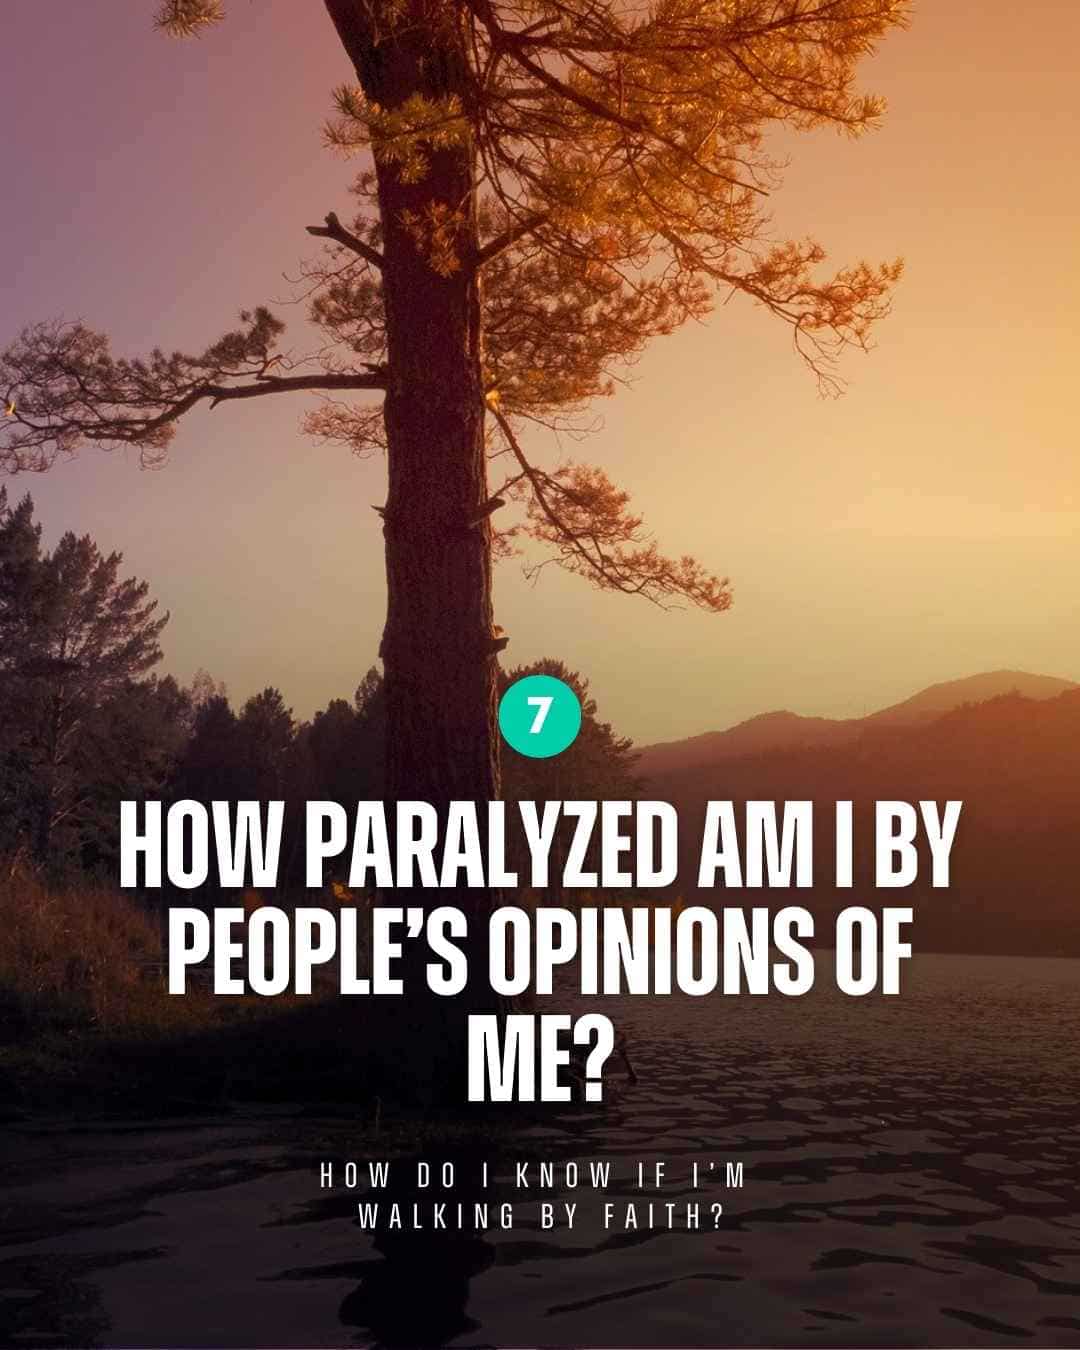 Walk by faith - How paralyzed am I by people’s opinions of me?